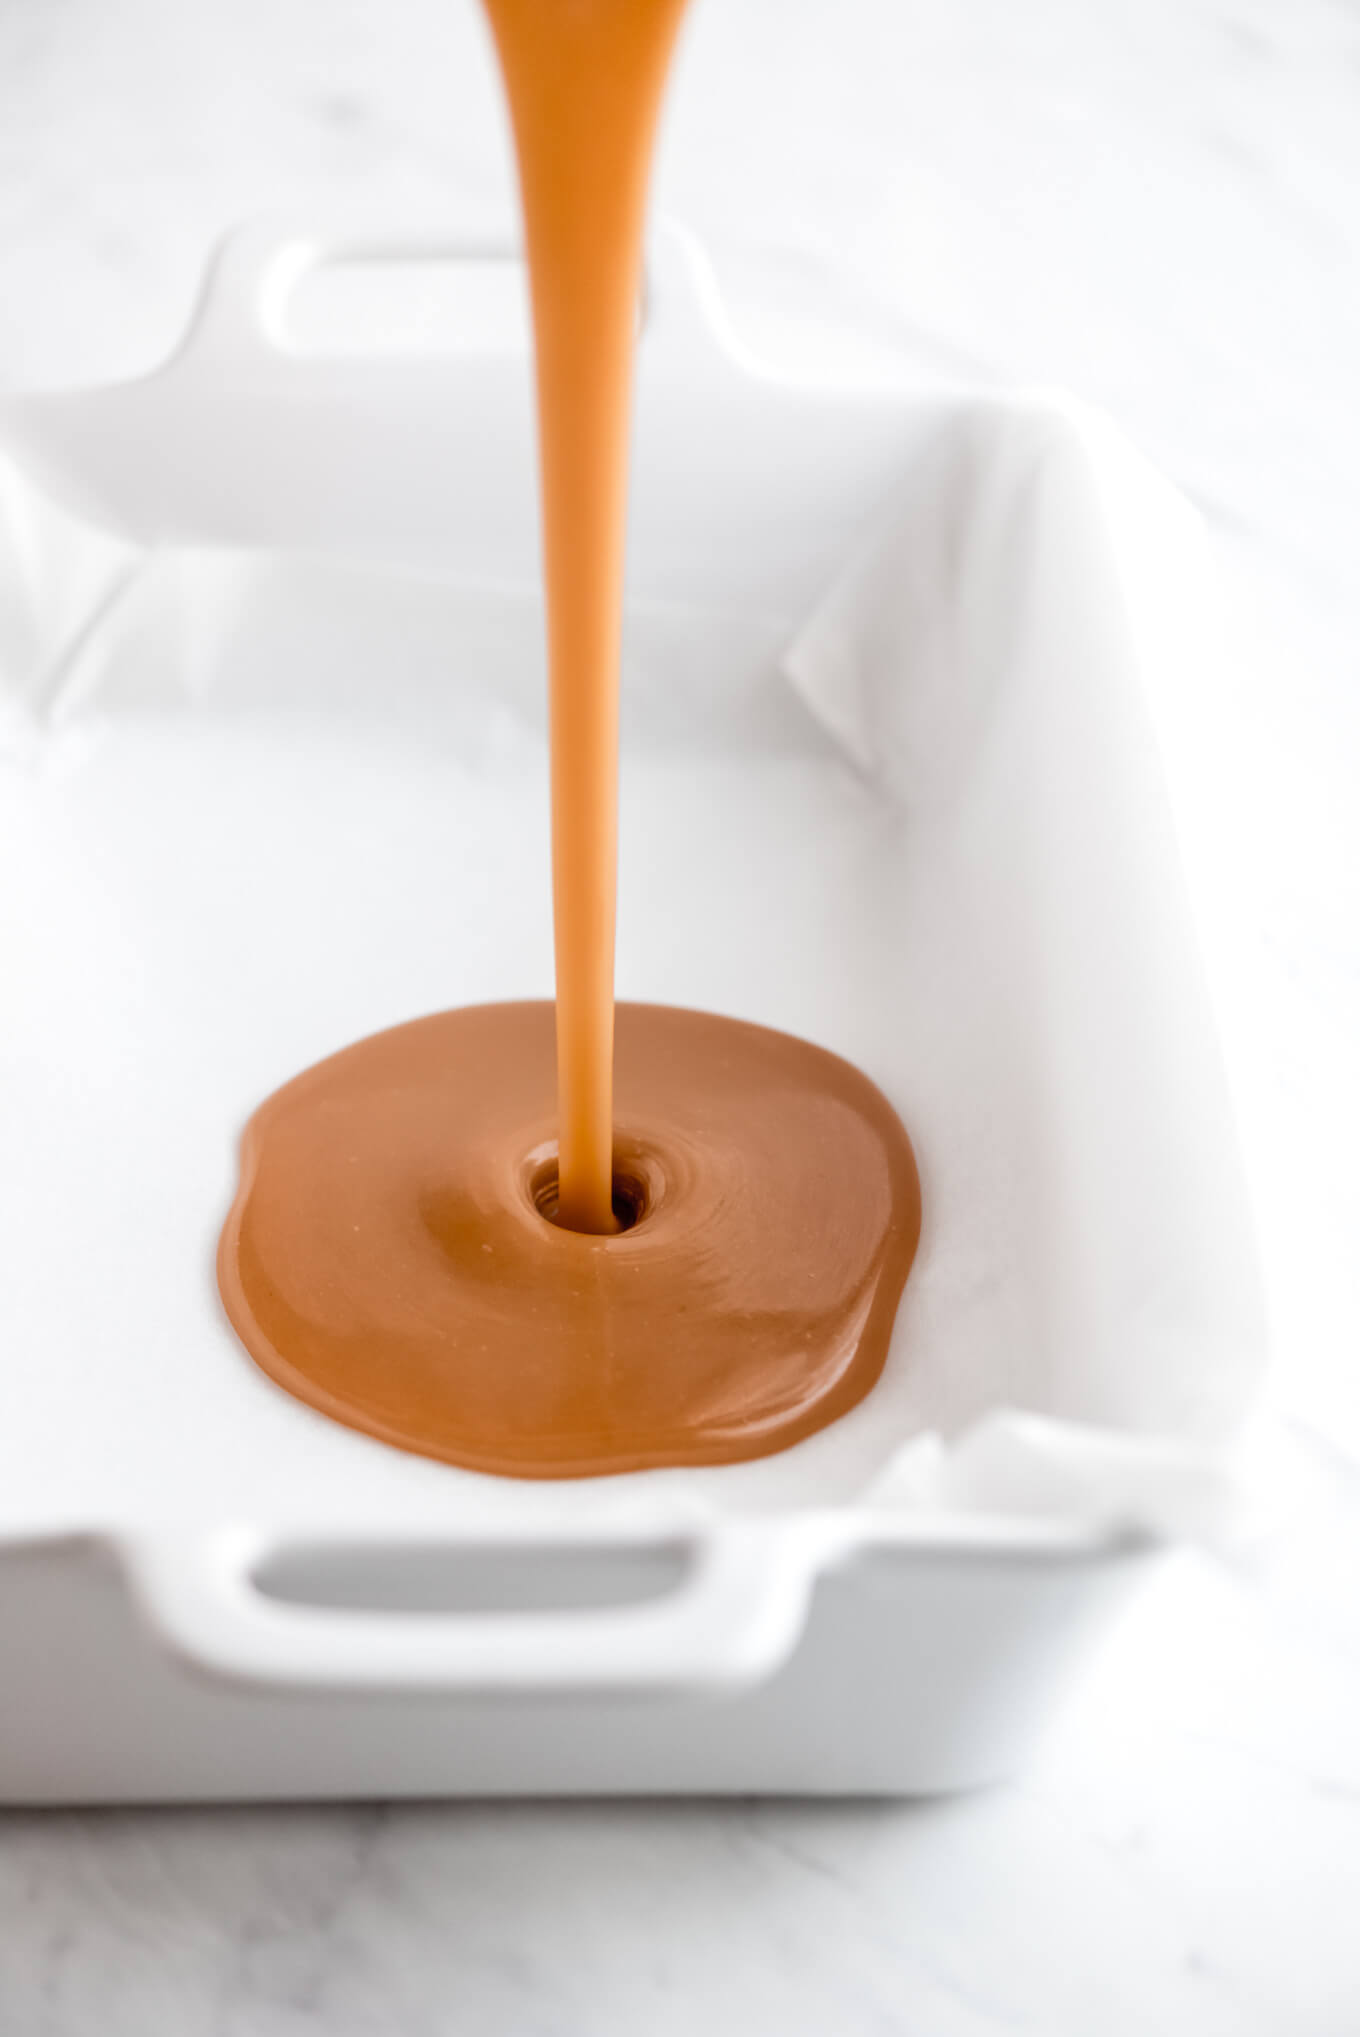 Hot caramel being poured into a parchment lined pan.